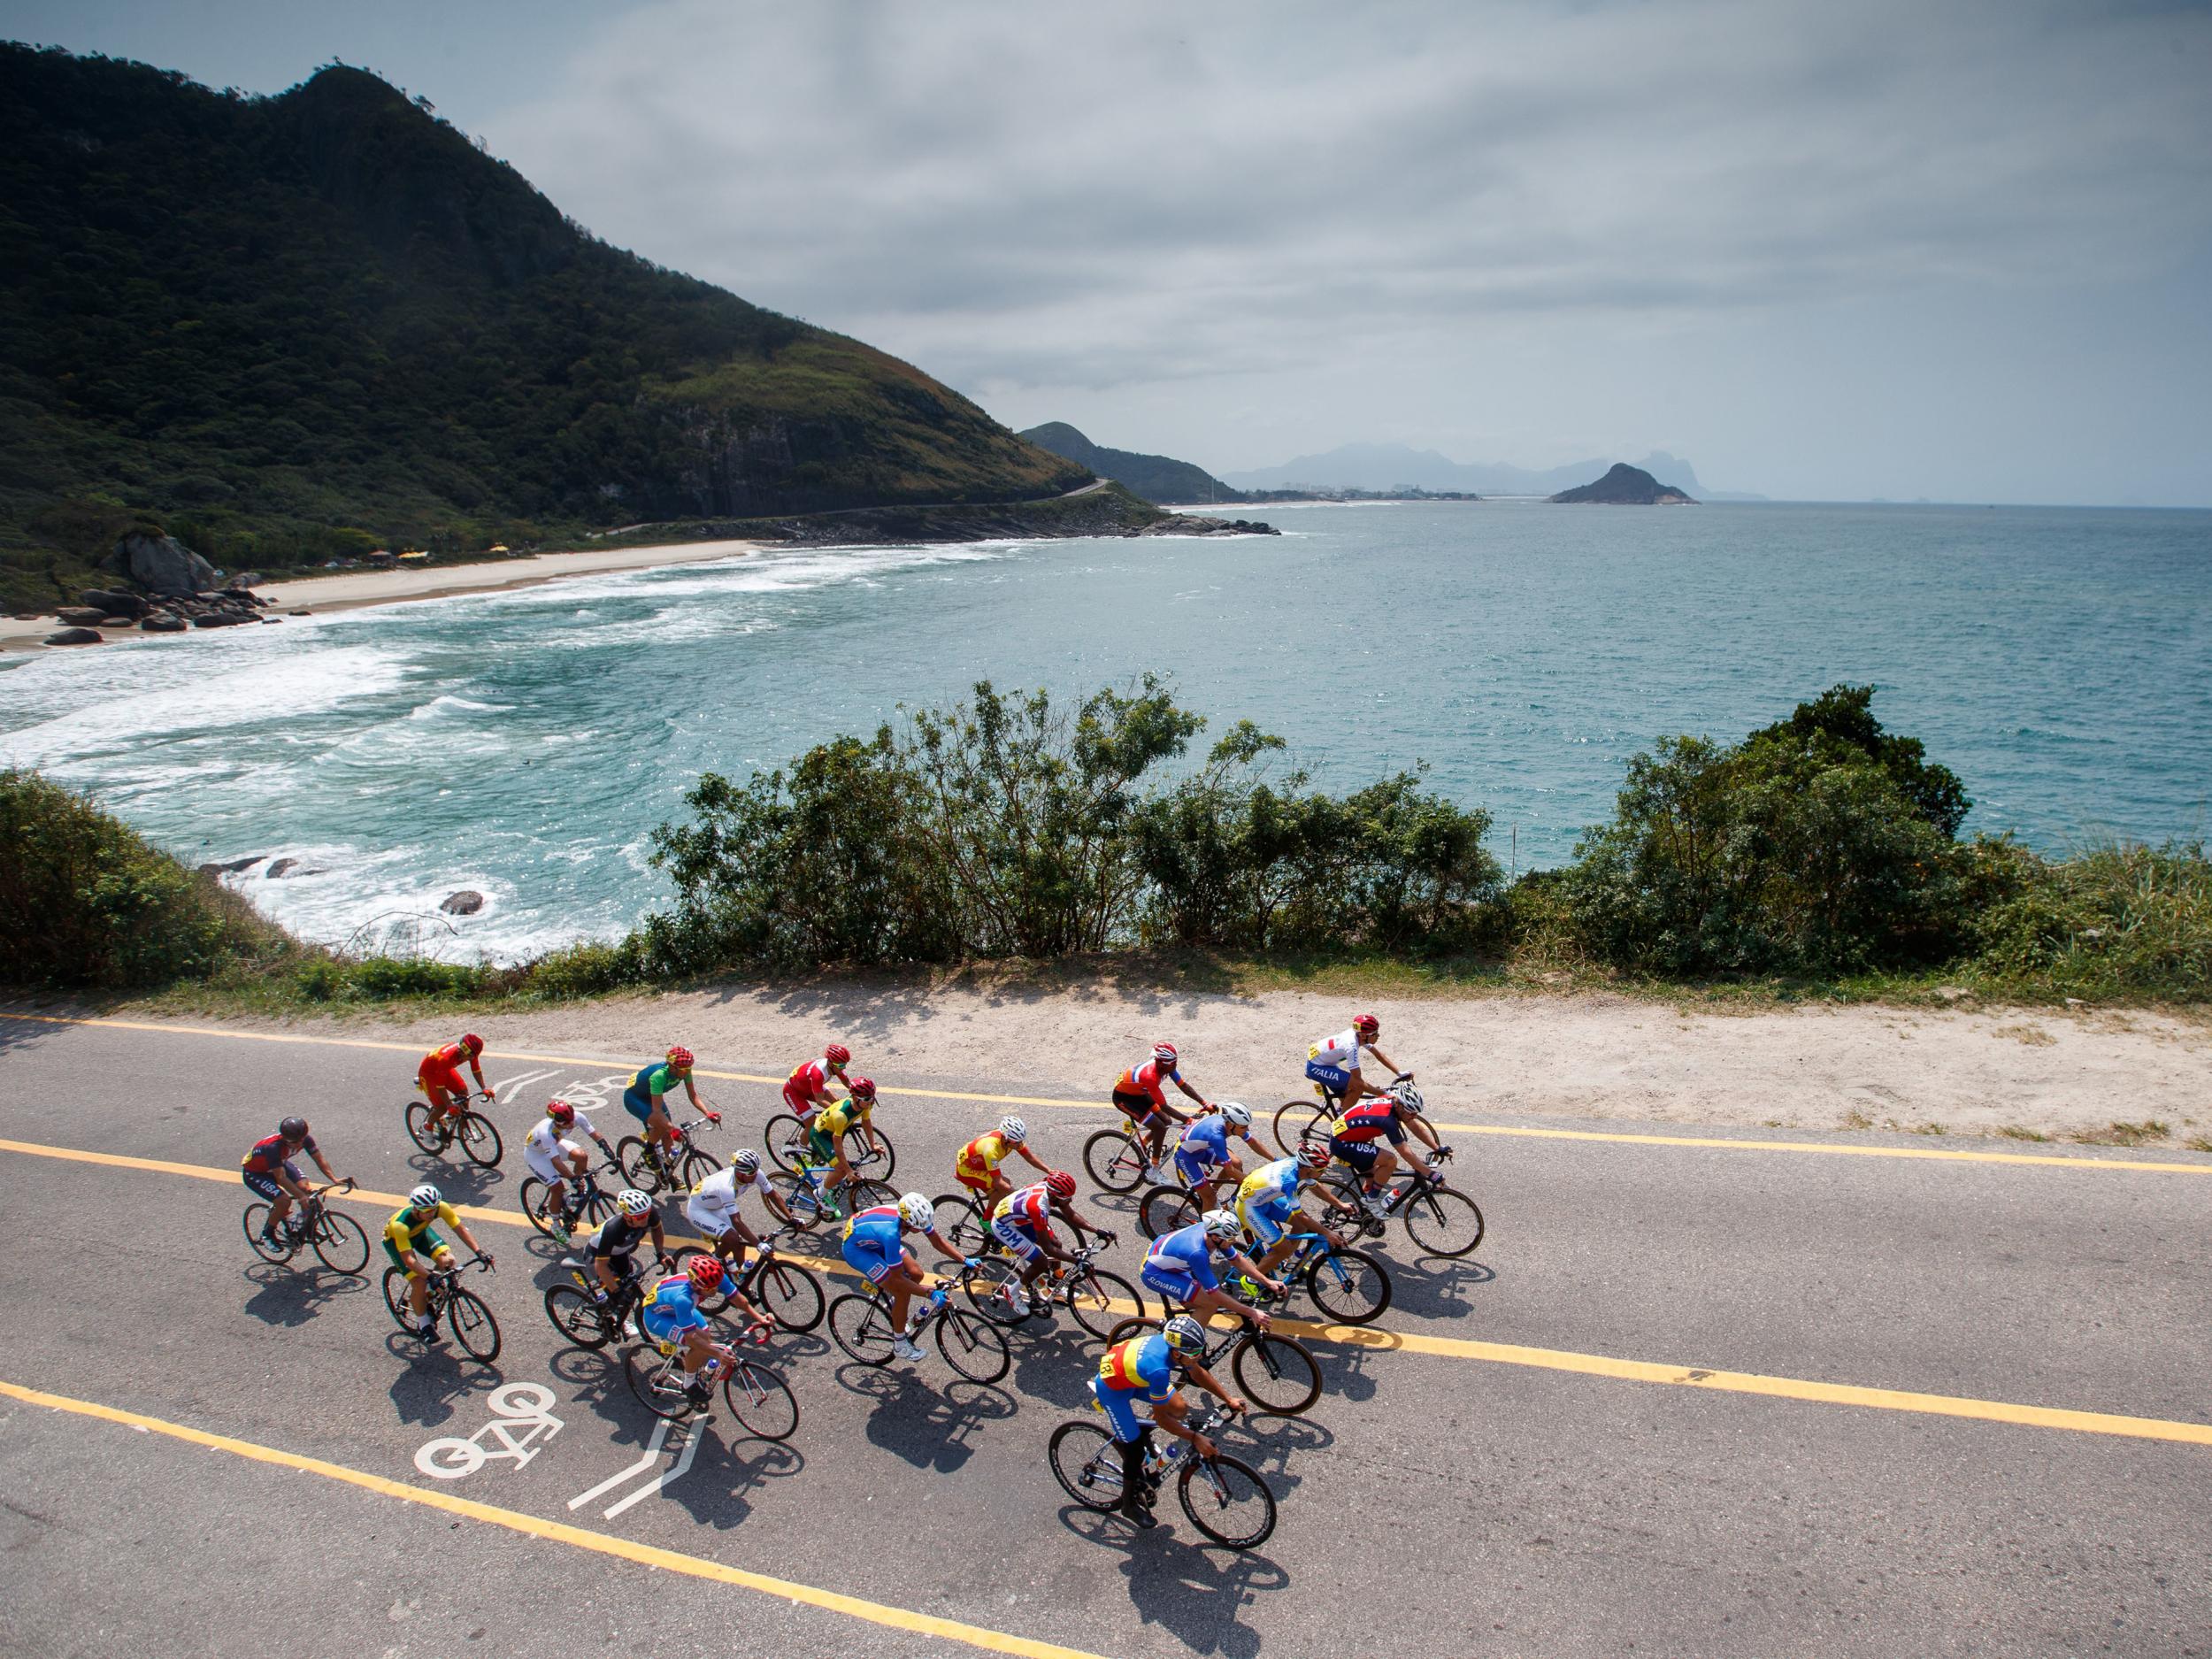 Cyclists compete in the men's road cycling race C4-5, during the Paralympic Games in Rio de Janeiro, Brazil